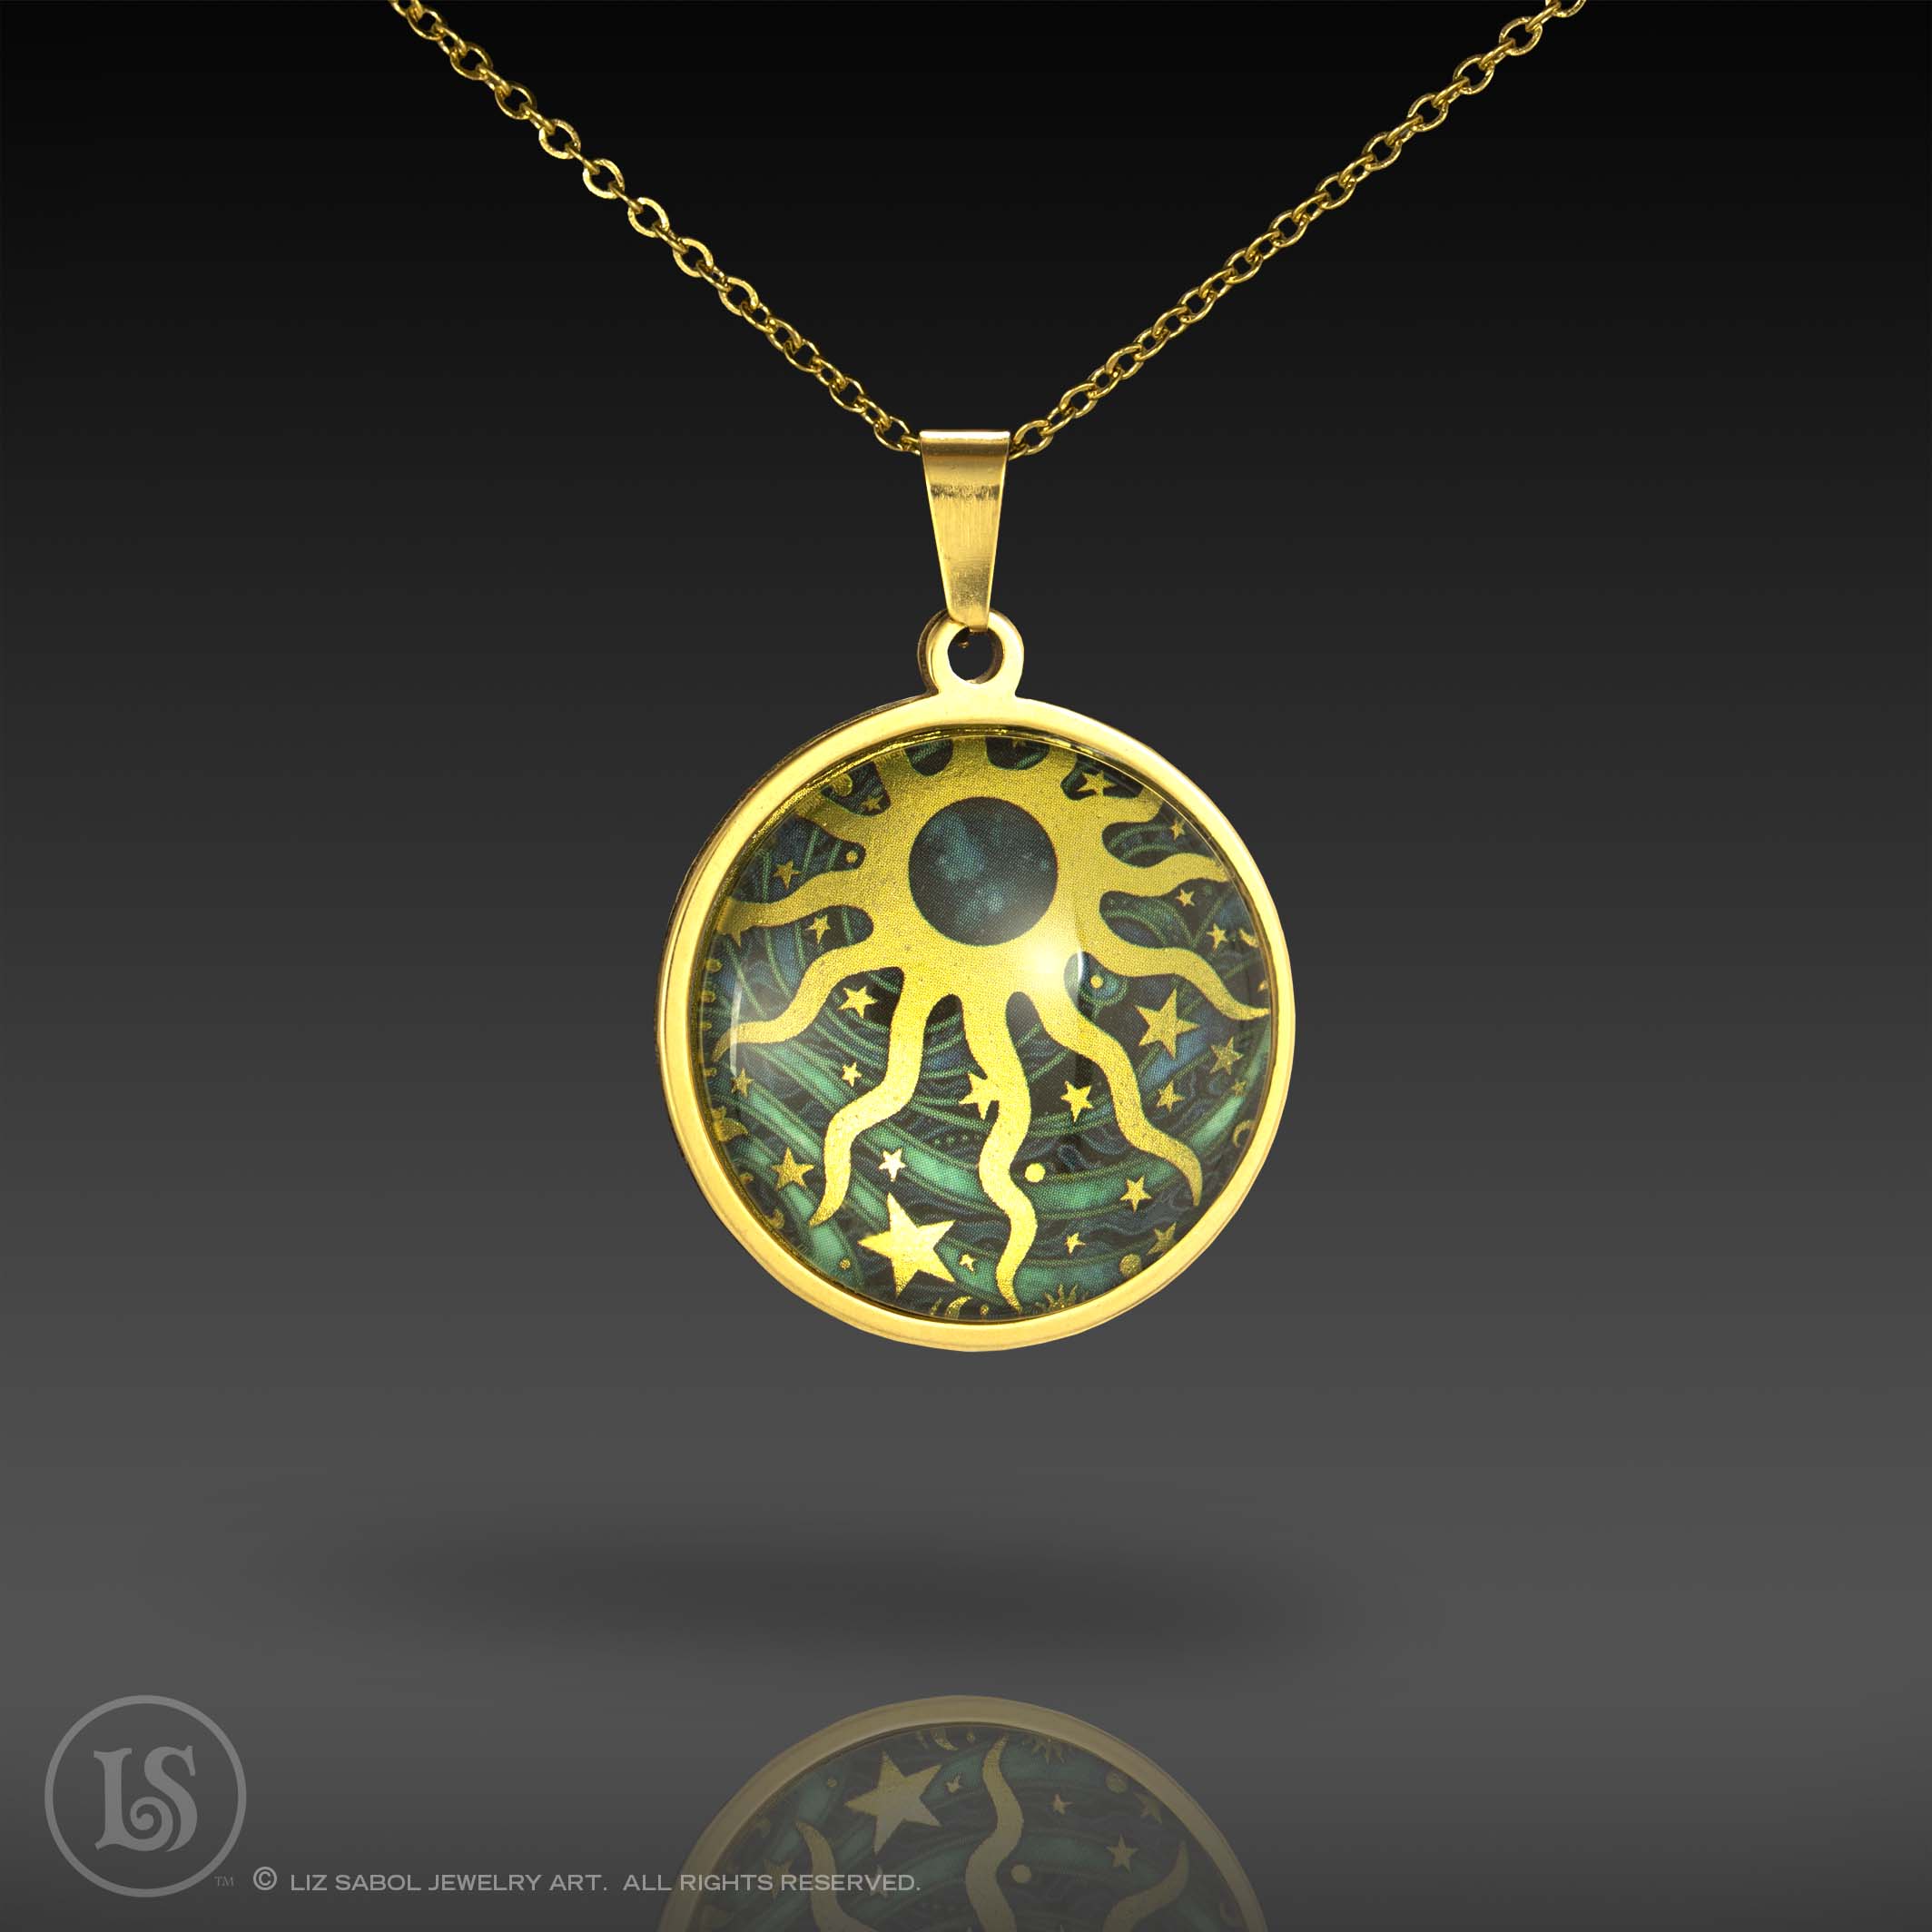 Celestial Sun Pendant, Glass, Gold-plated Stainless Steel